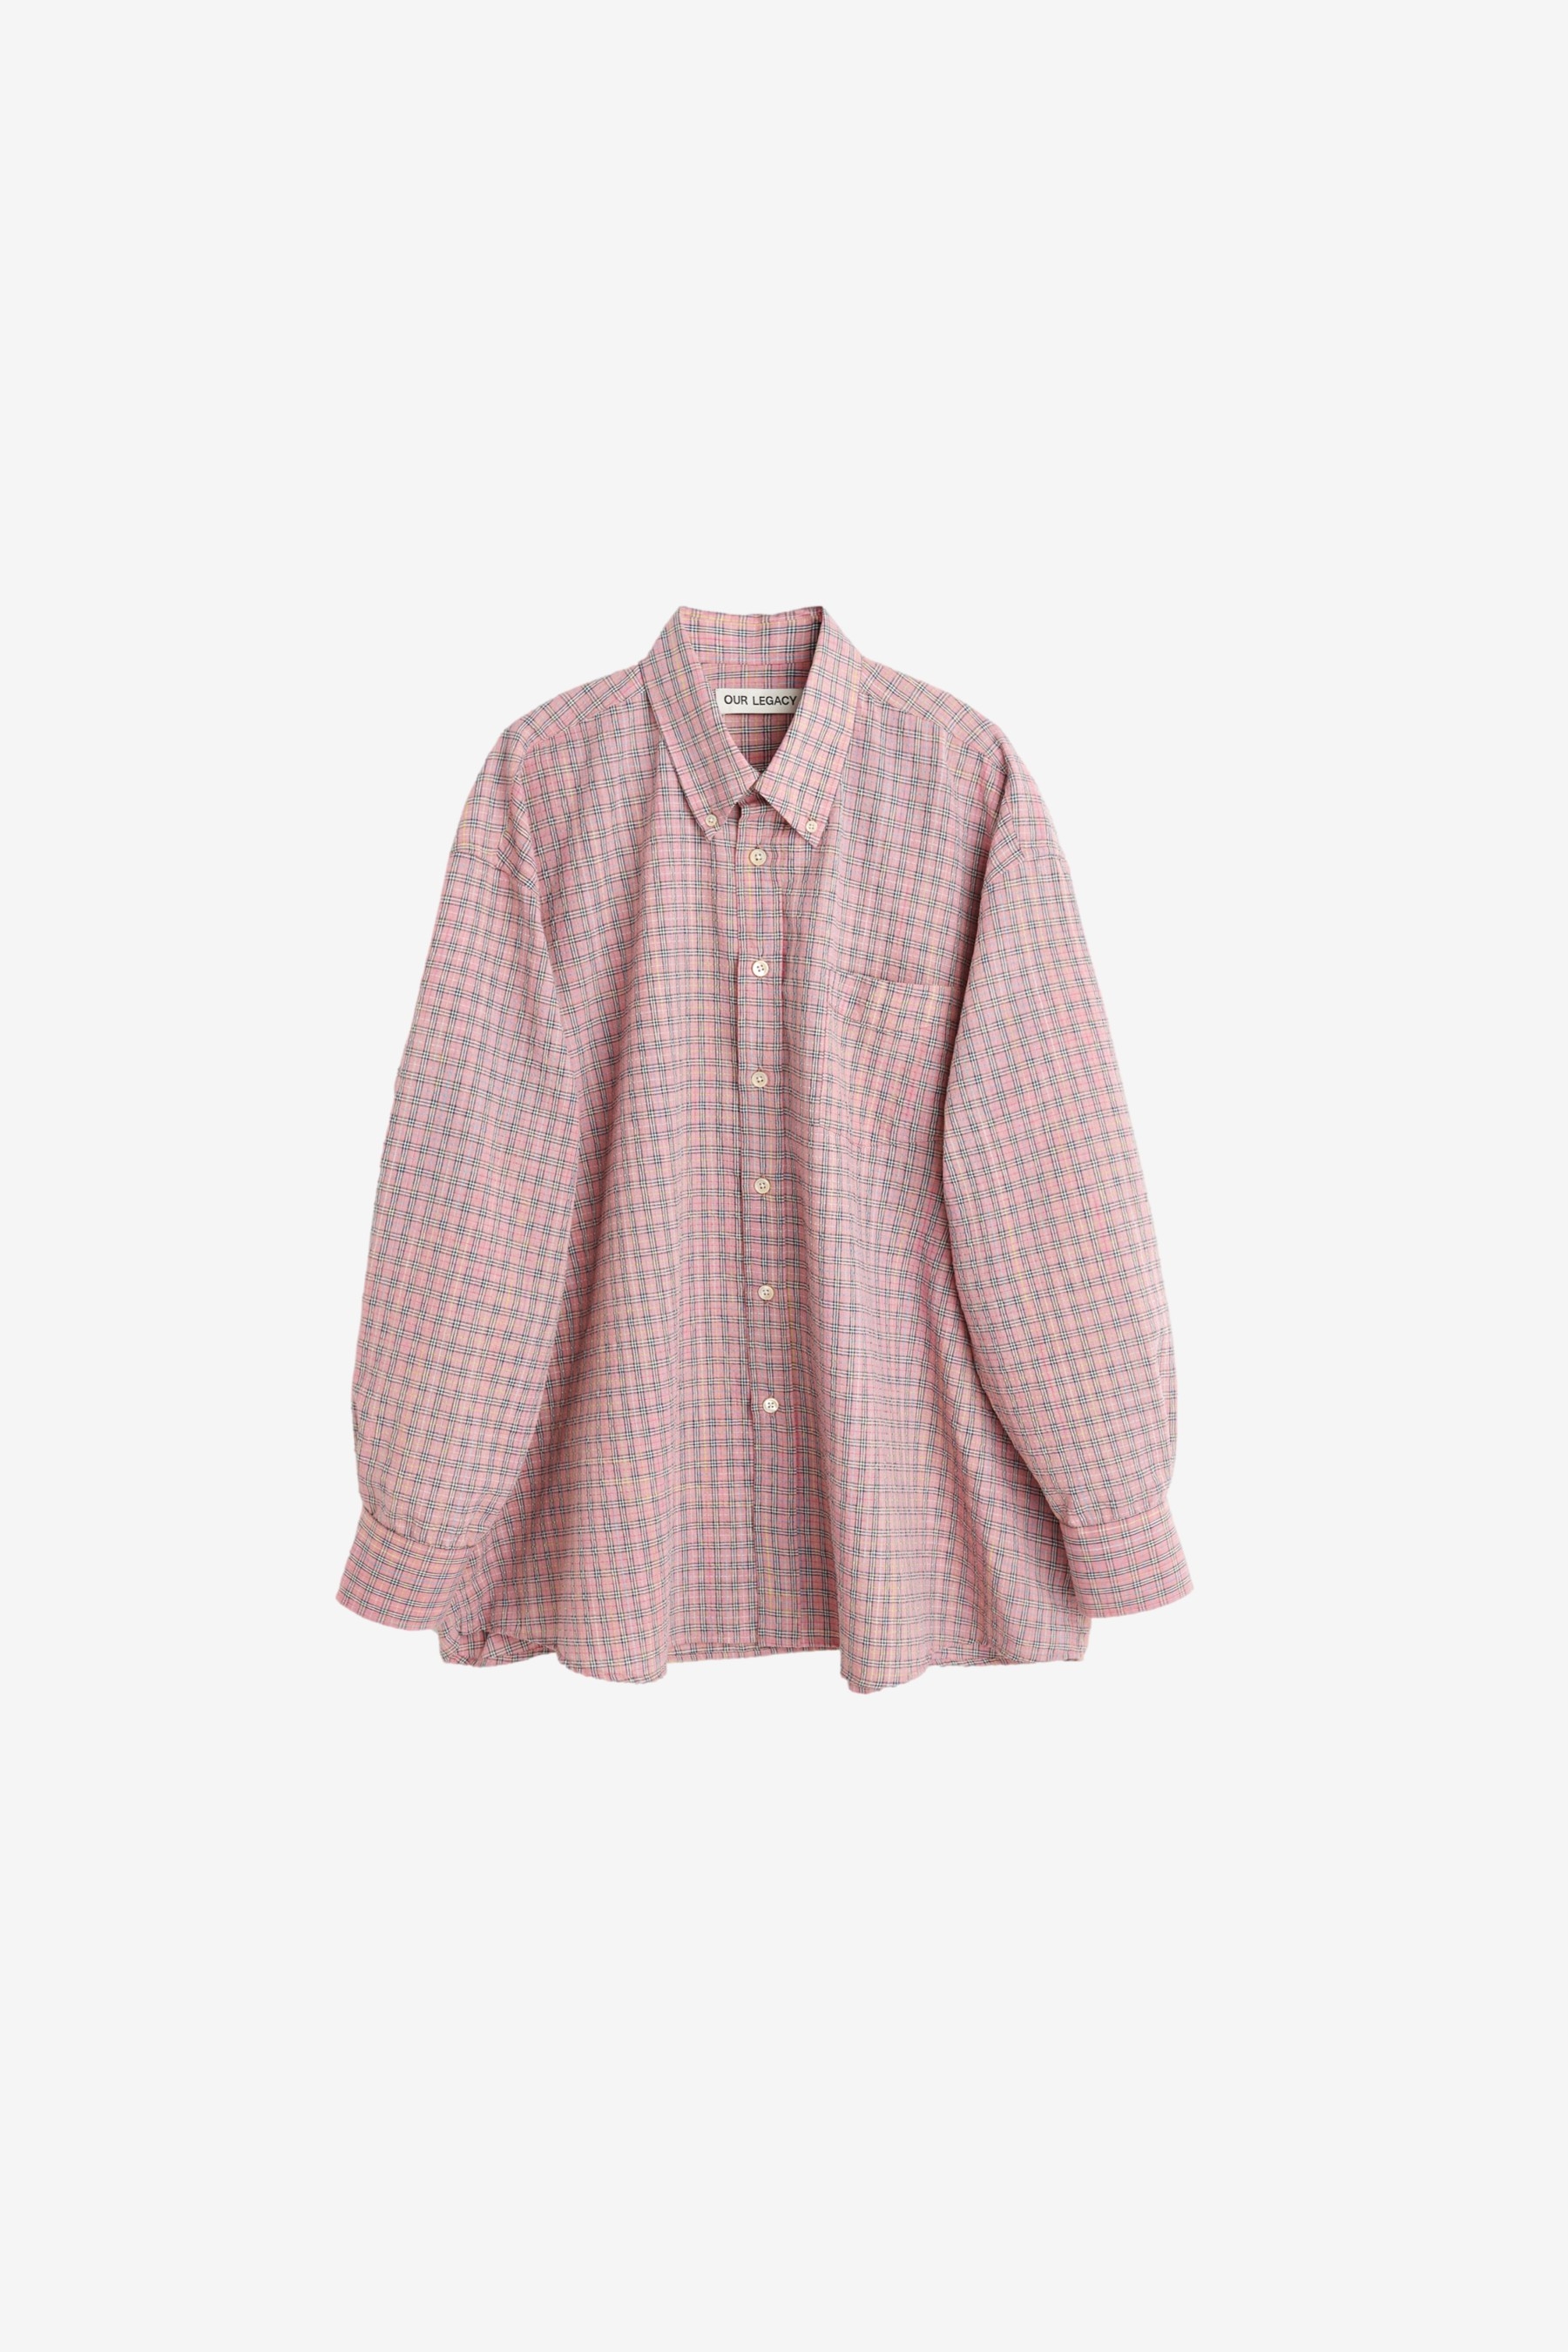 Borrowed BD Shirt in Pink Kimble Check - Our Legacy | Afura Store